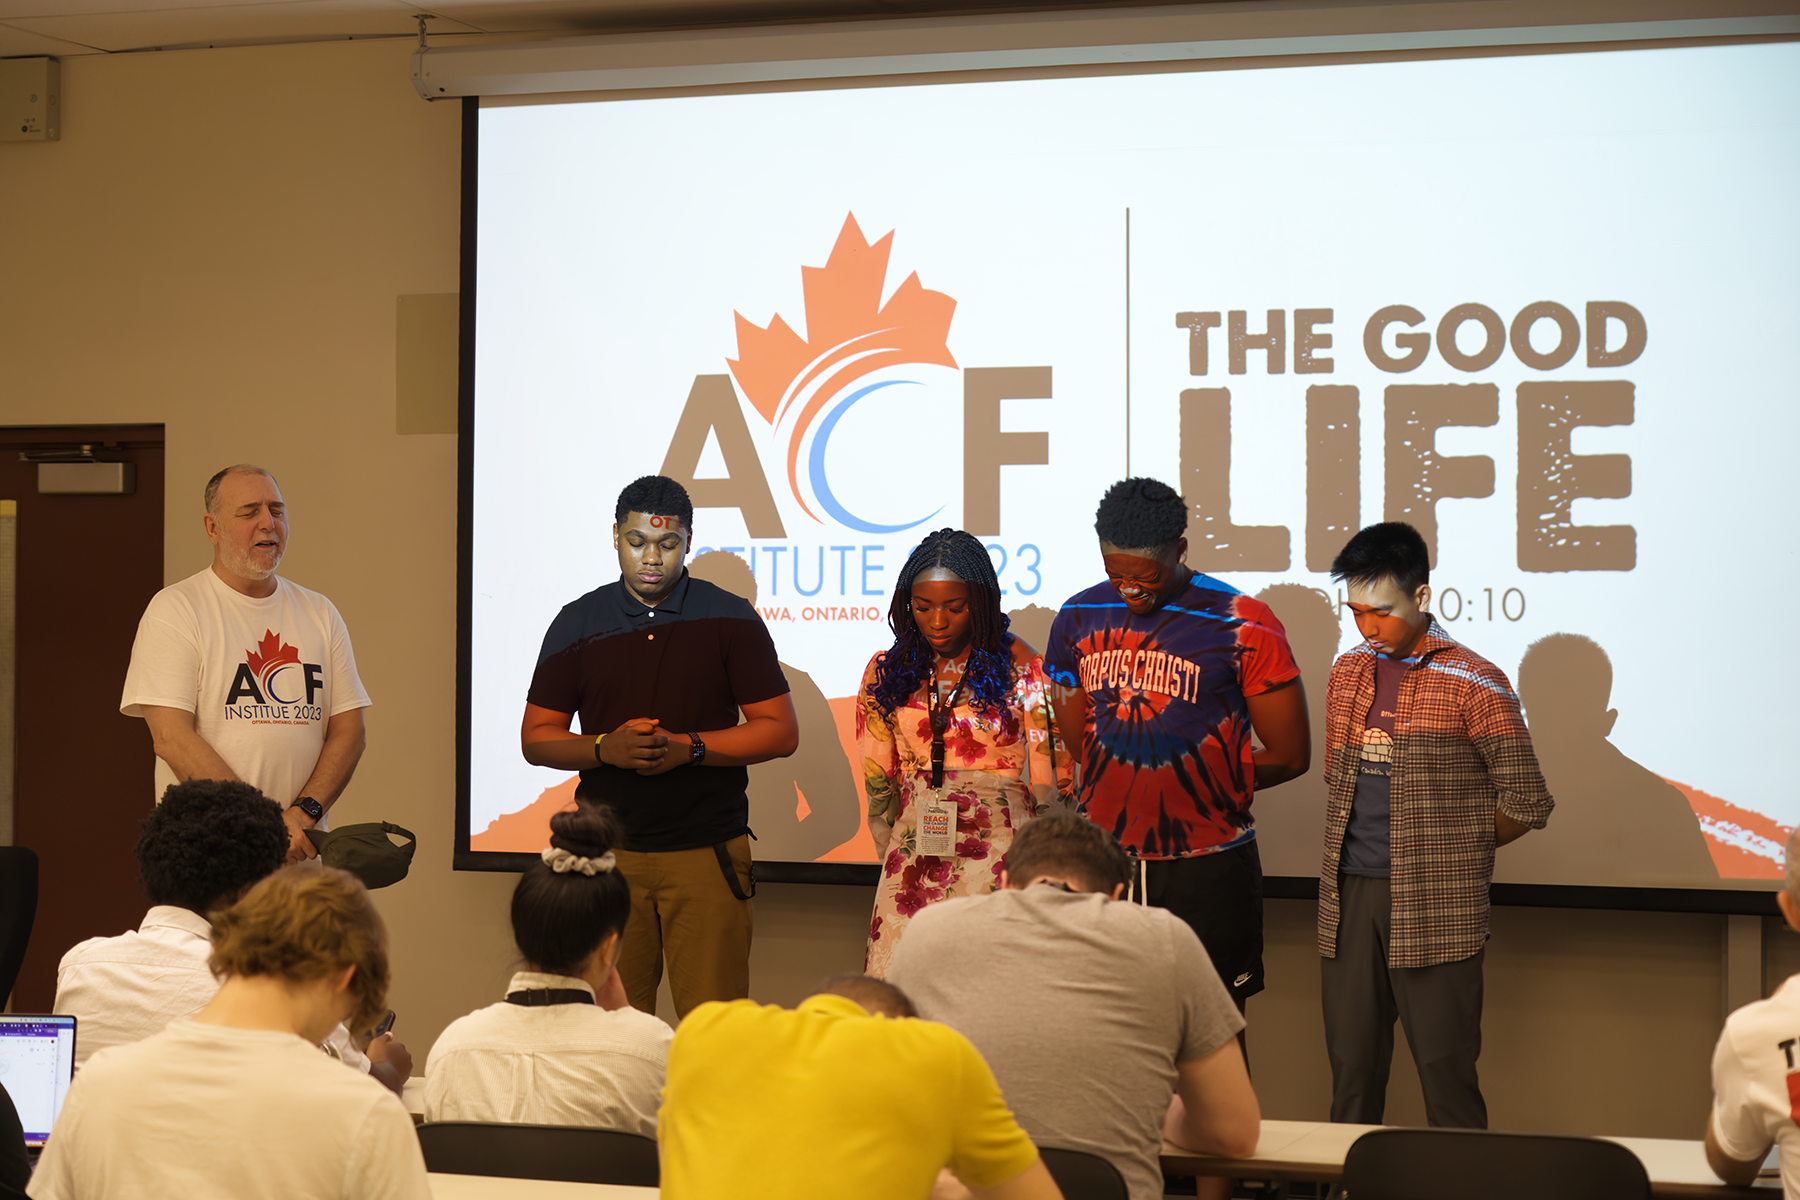 A diverse group of people praying in front of a screen reading "The Good Life."